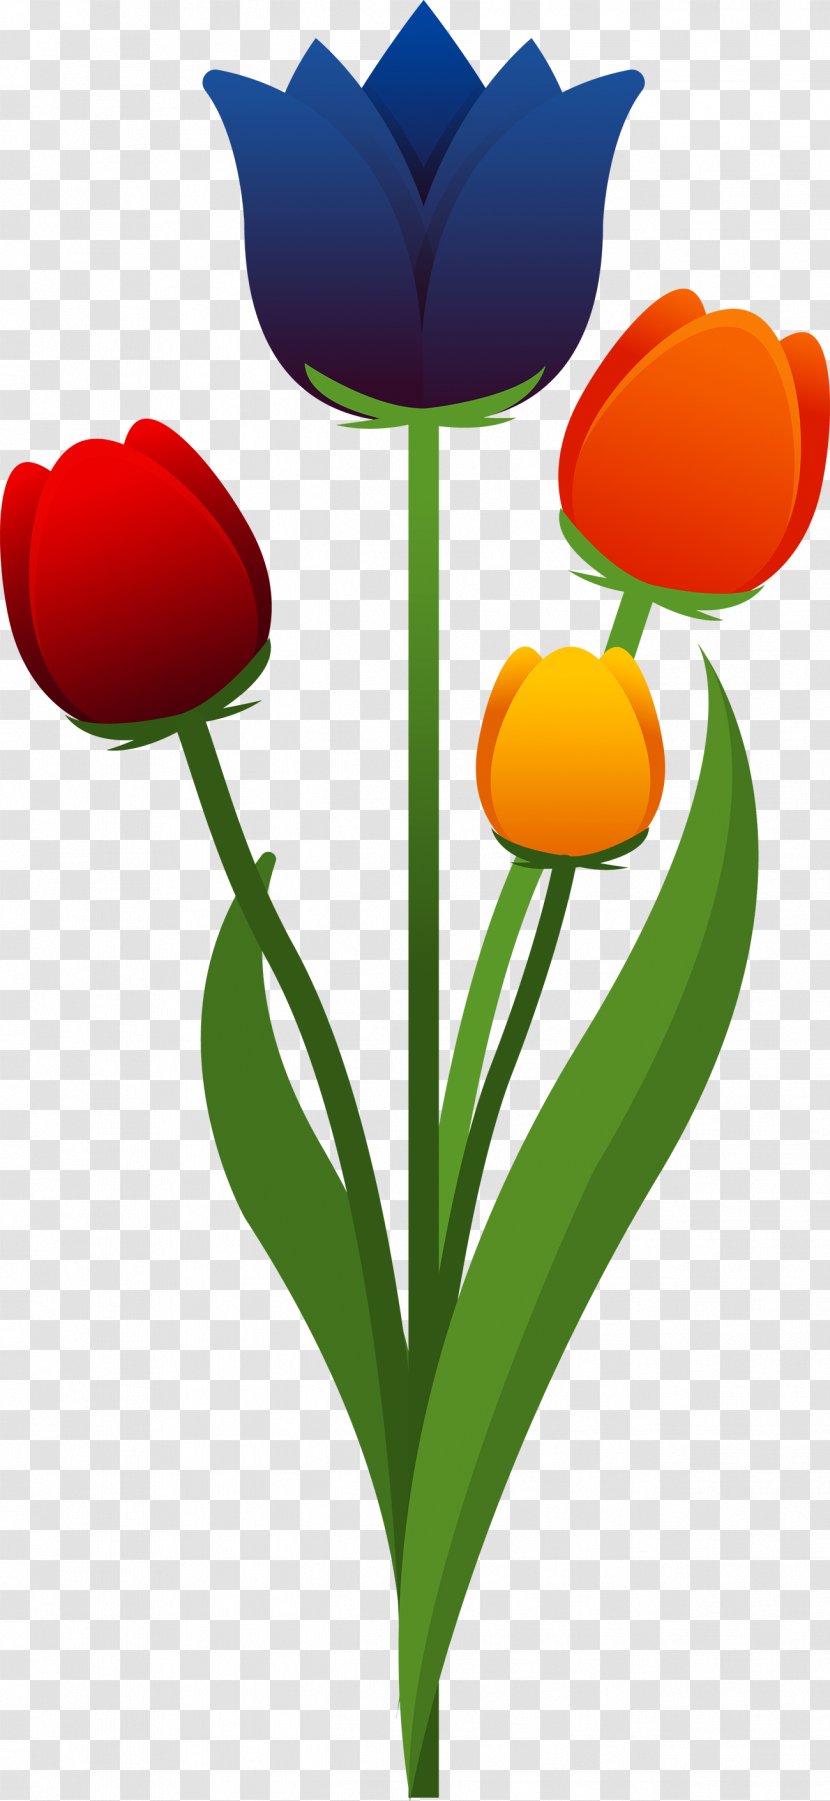 Tulip Flower - Lily Family Transparent PNG